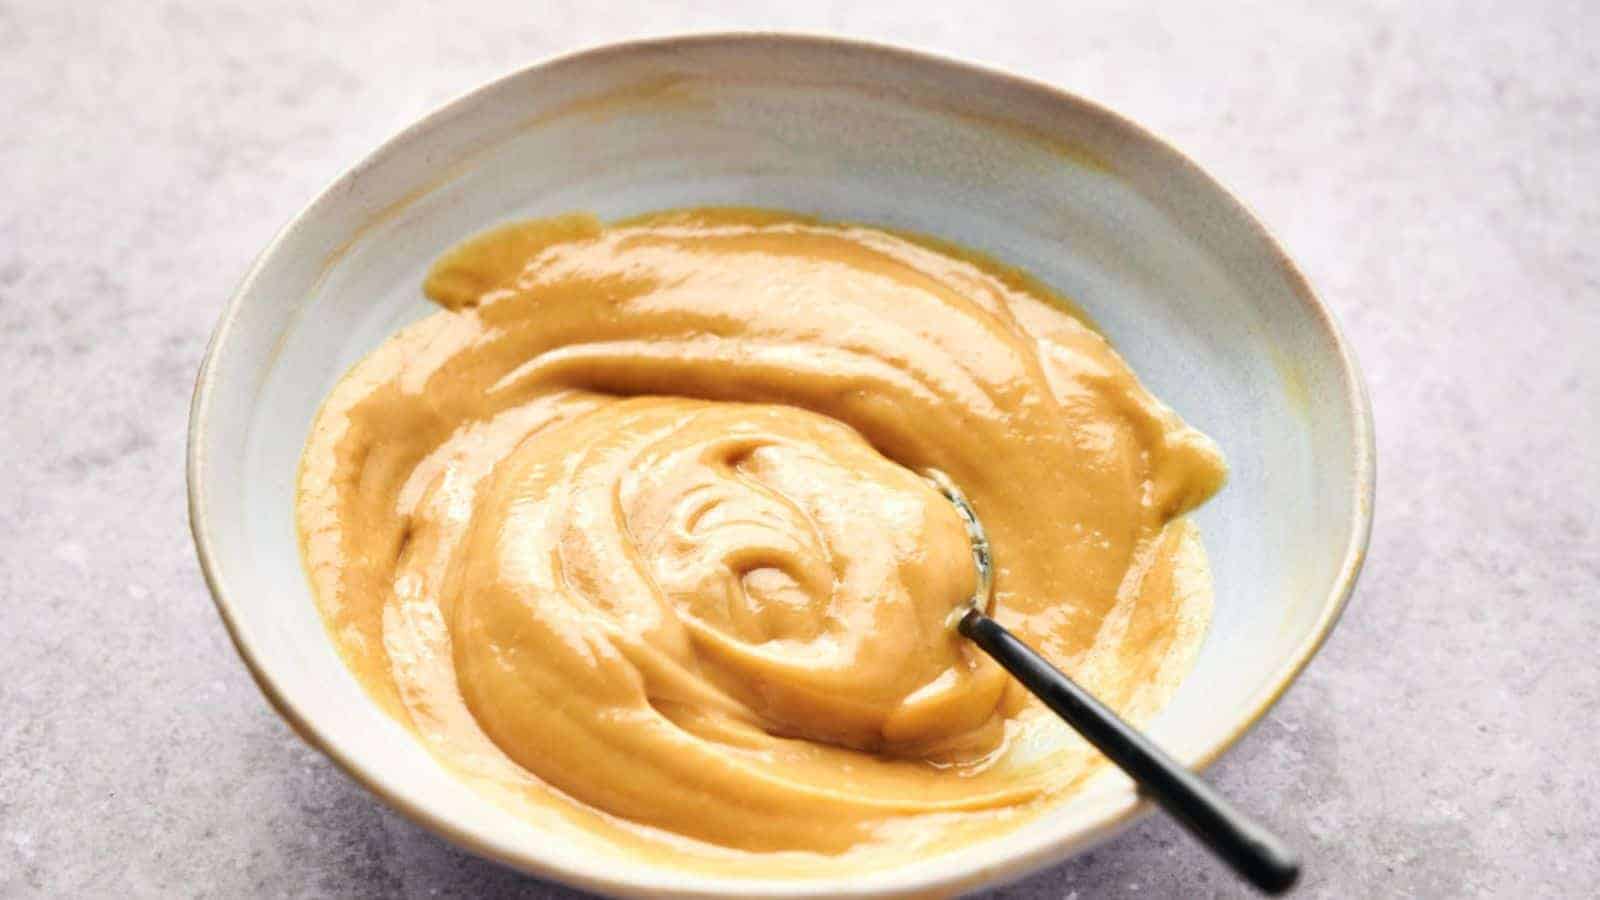 A bowl of smooth, creamy peanut butter with a hint of Chick-fil-A sauce and a spoon inside.